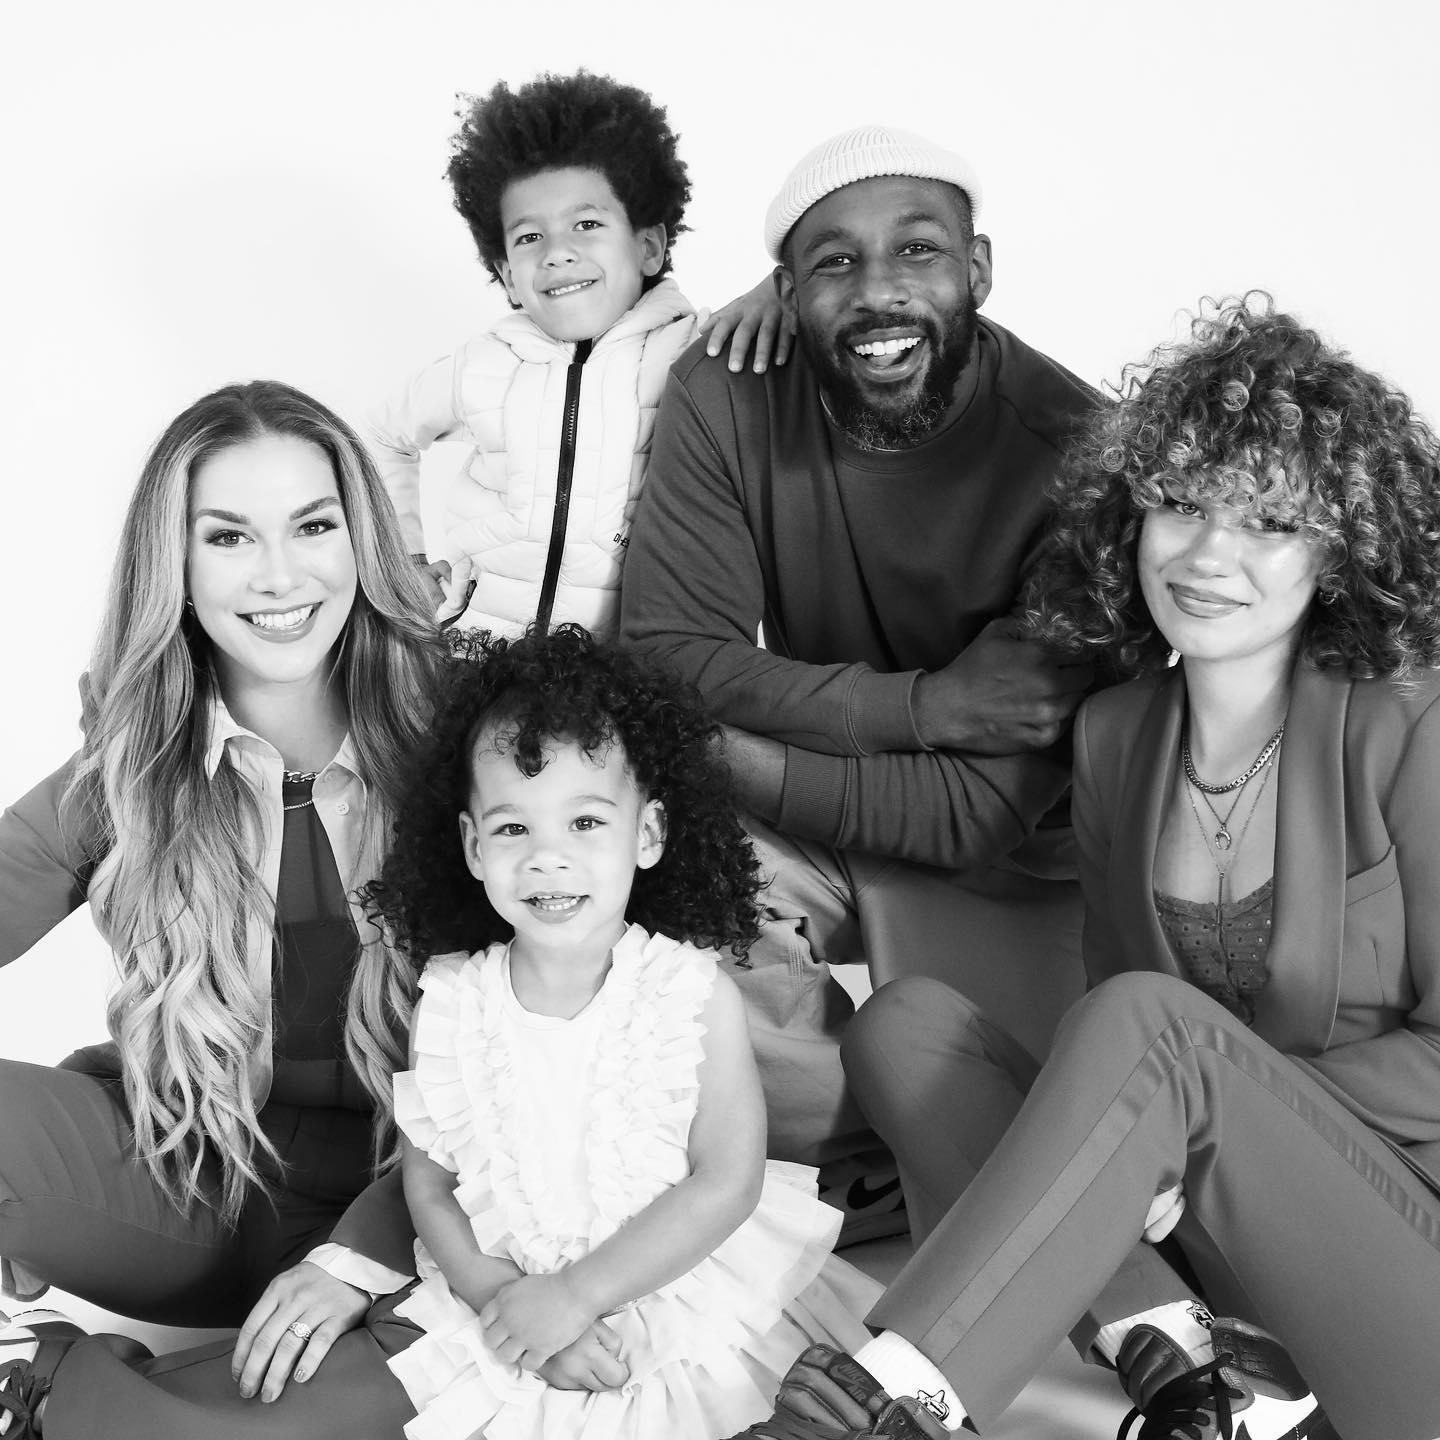 Allison Holker Boss Pays Tribute To Late Husband 'tWitch' On Father's Day: 'We Love You Stephen Forever And Always'